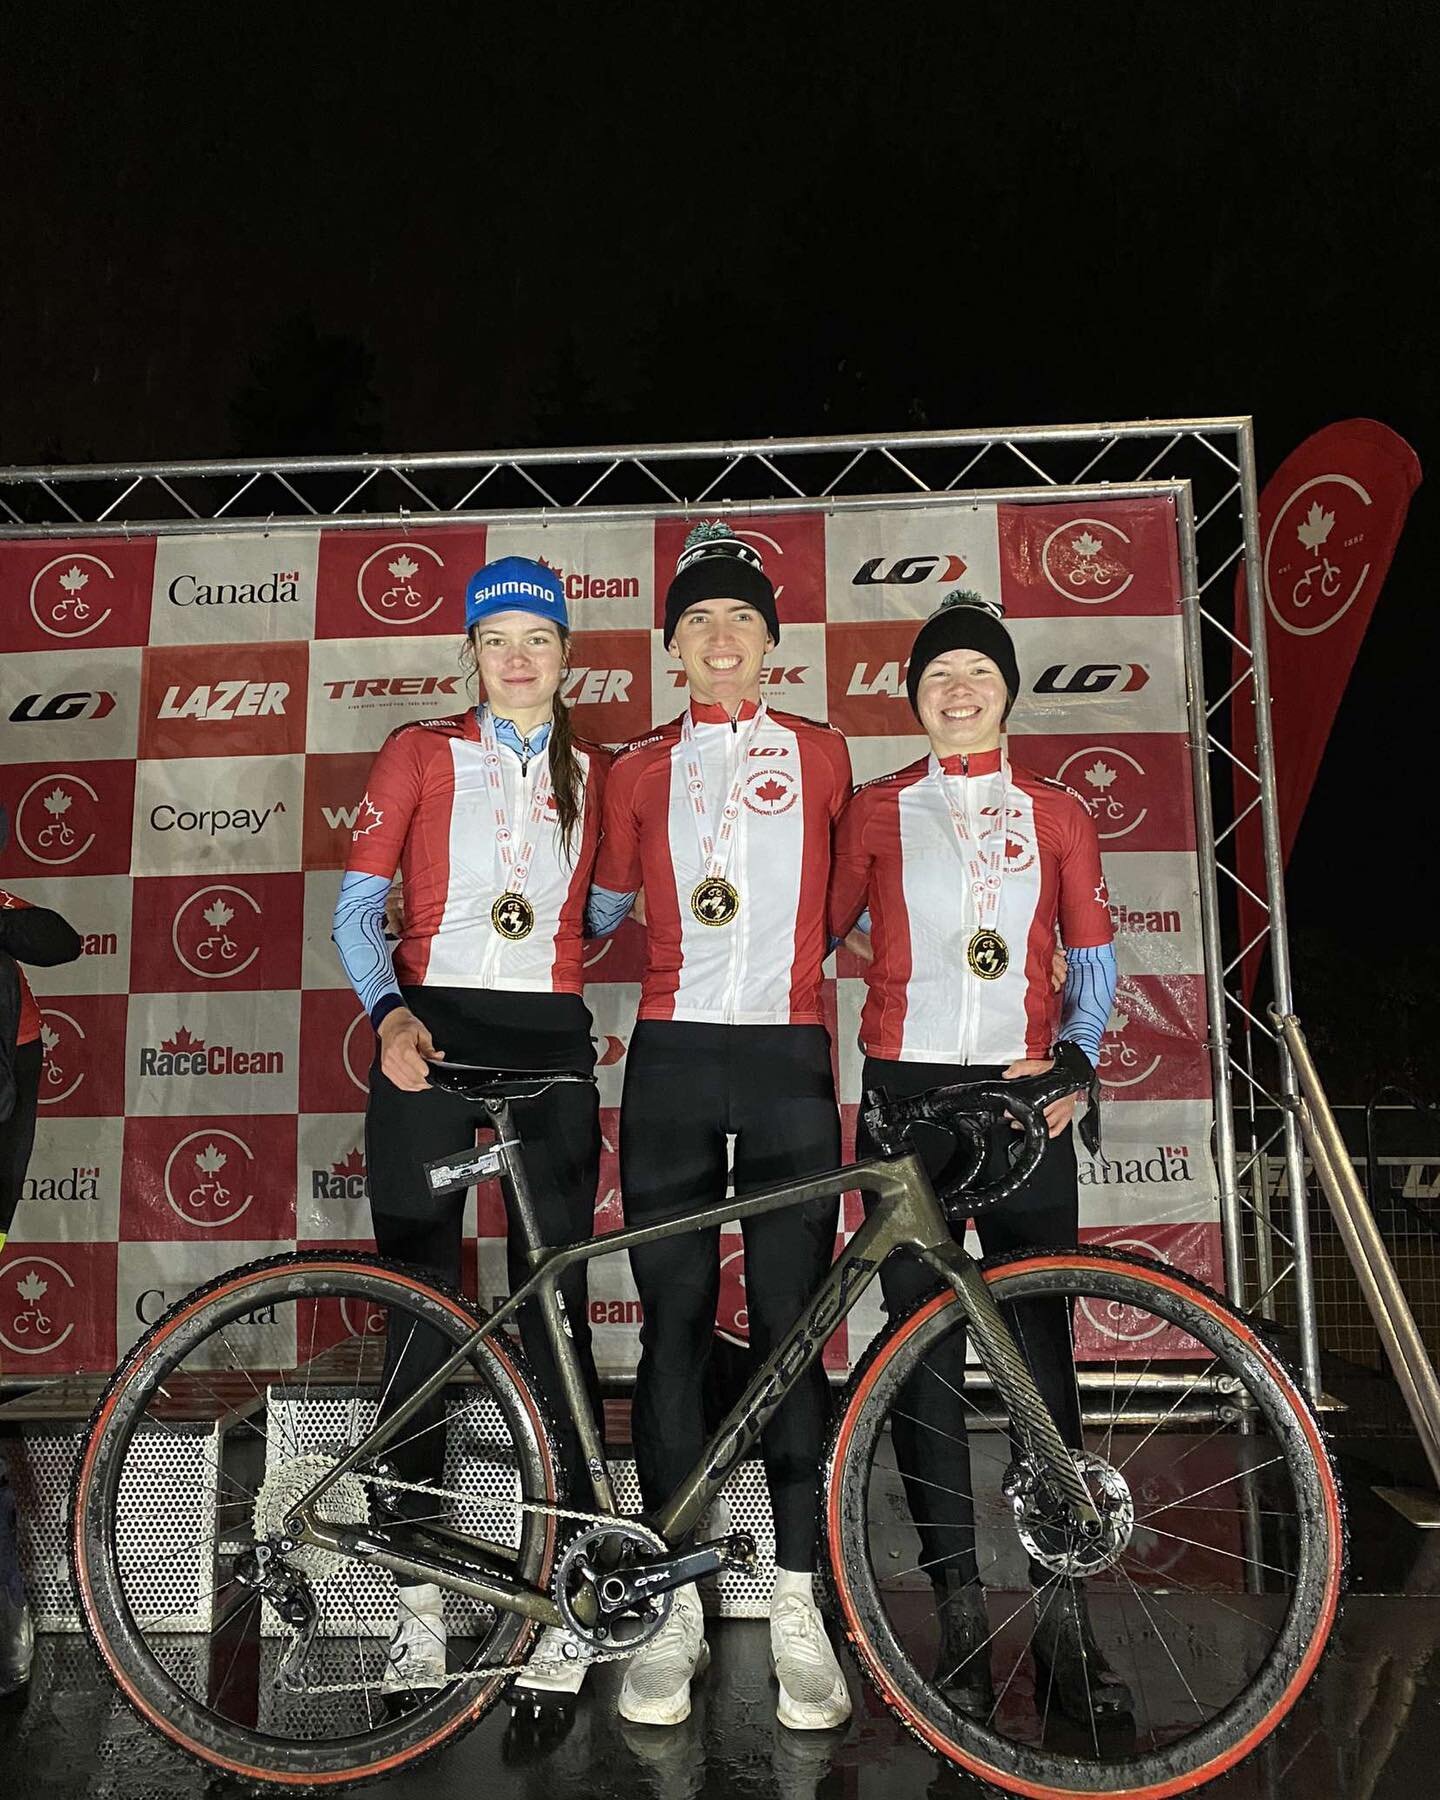 What a day&hellip;national champs sweep 🇨🇦! Someone mentioned there are a lot of teams with blue kit so we decided to go for the red and white look! Thank you to everyone who helped us get here and keep our equipment running perfectly.

@orbea
@rid